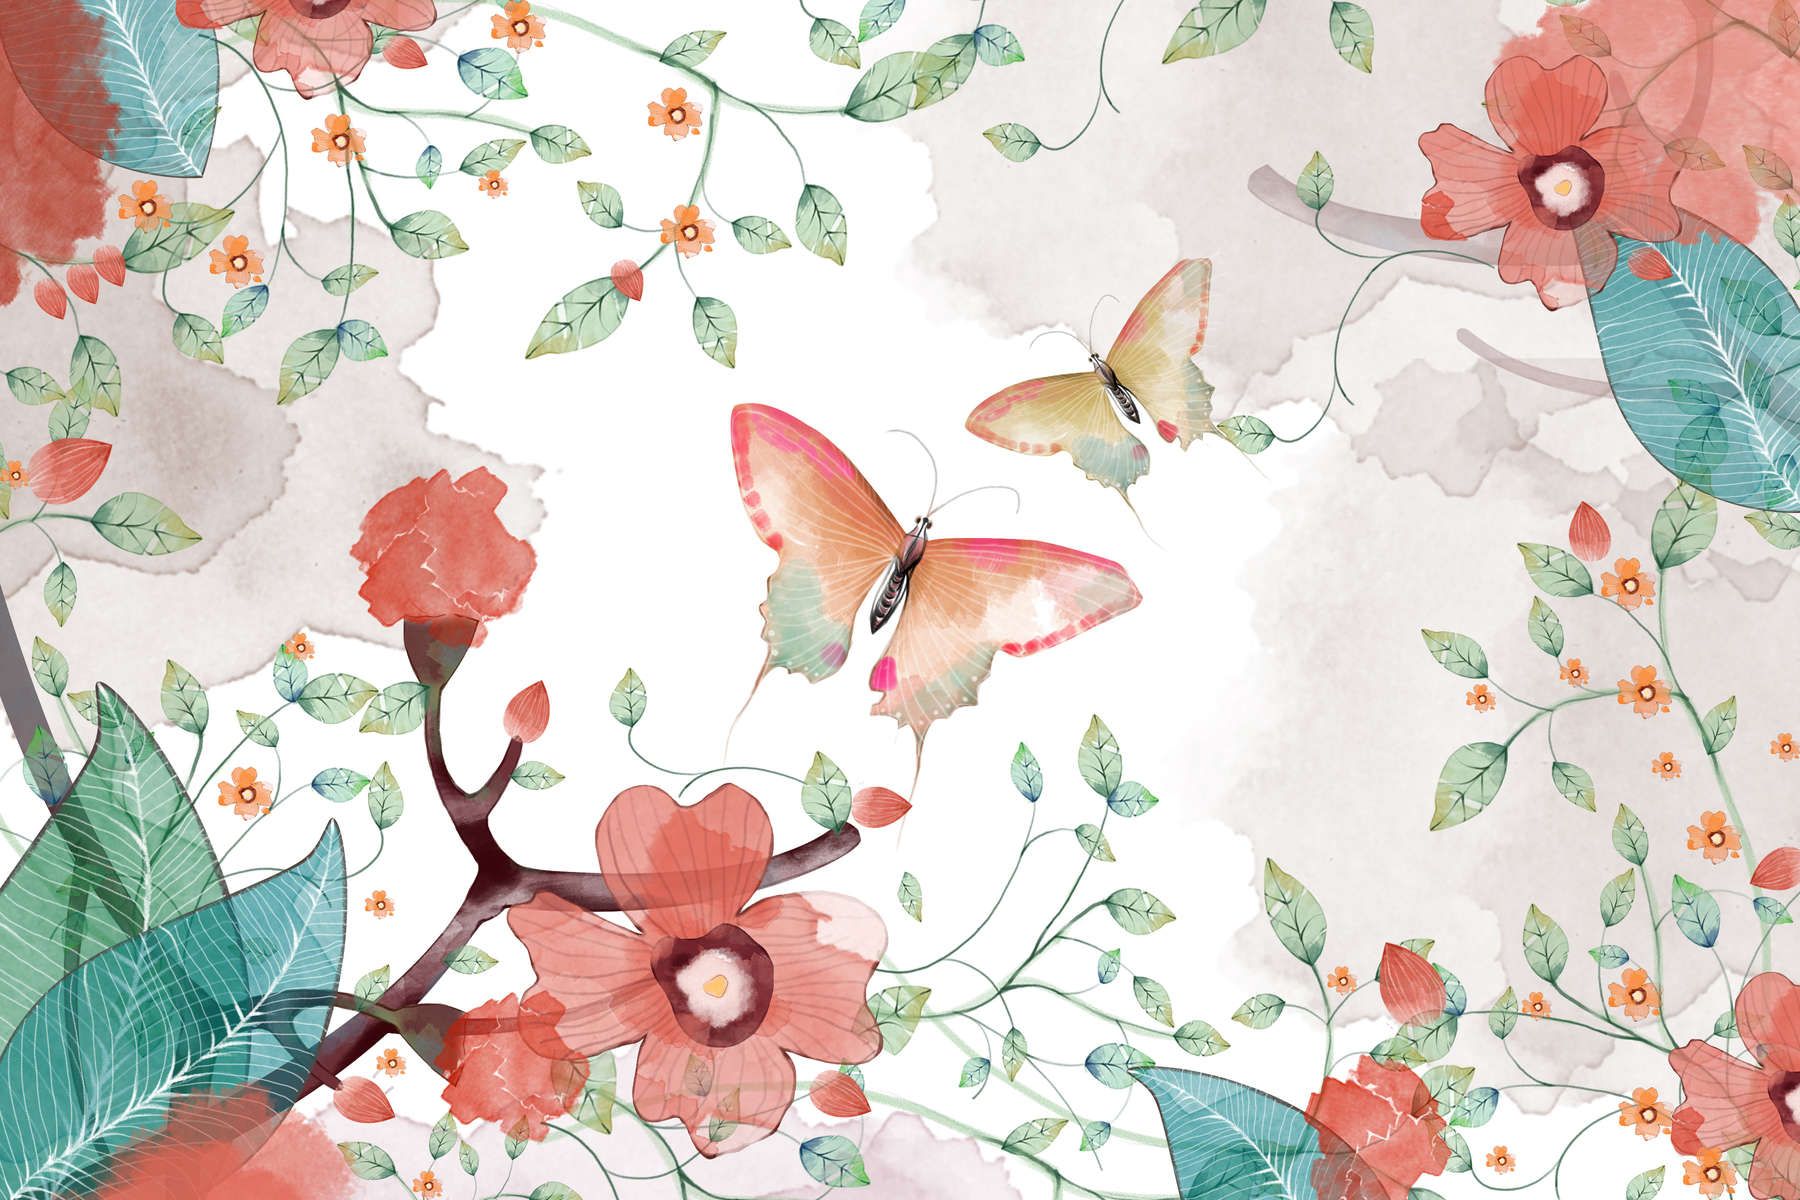             Photo wallpaper floral with leaves and butterflies - Smooth & slightly shiny non-woven
        